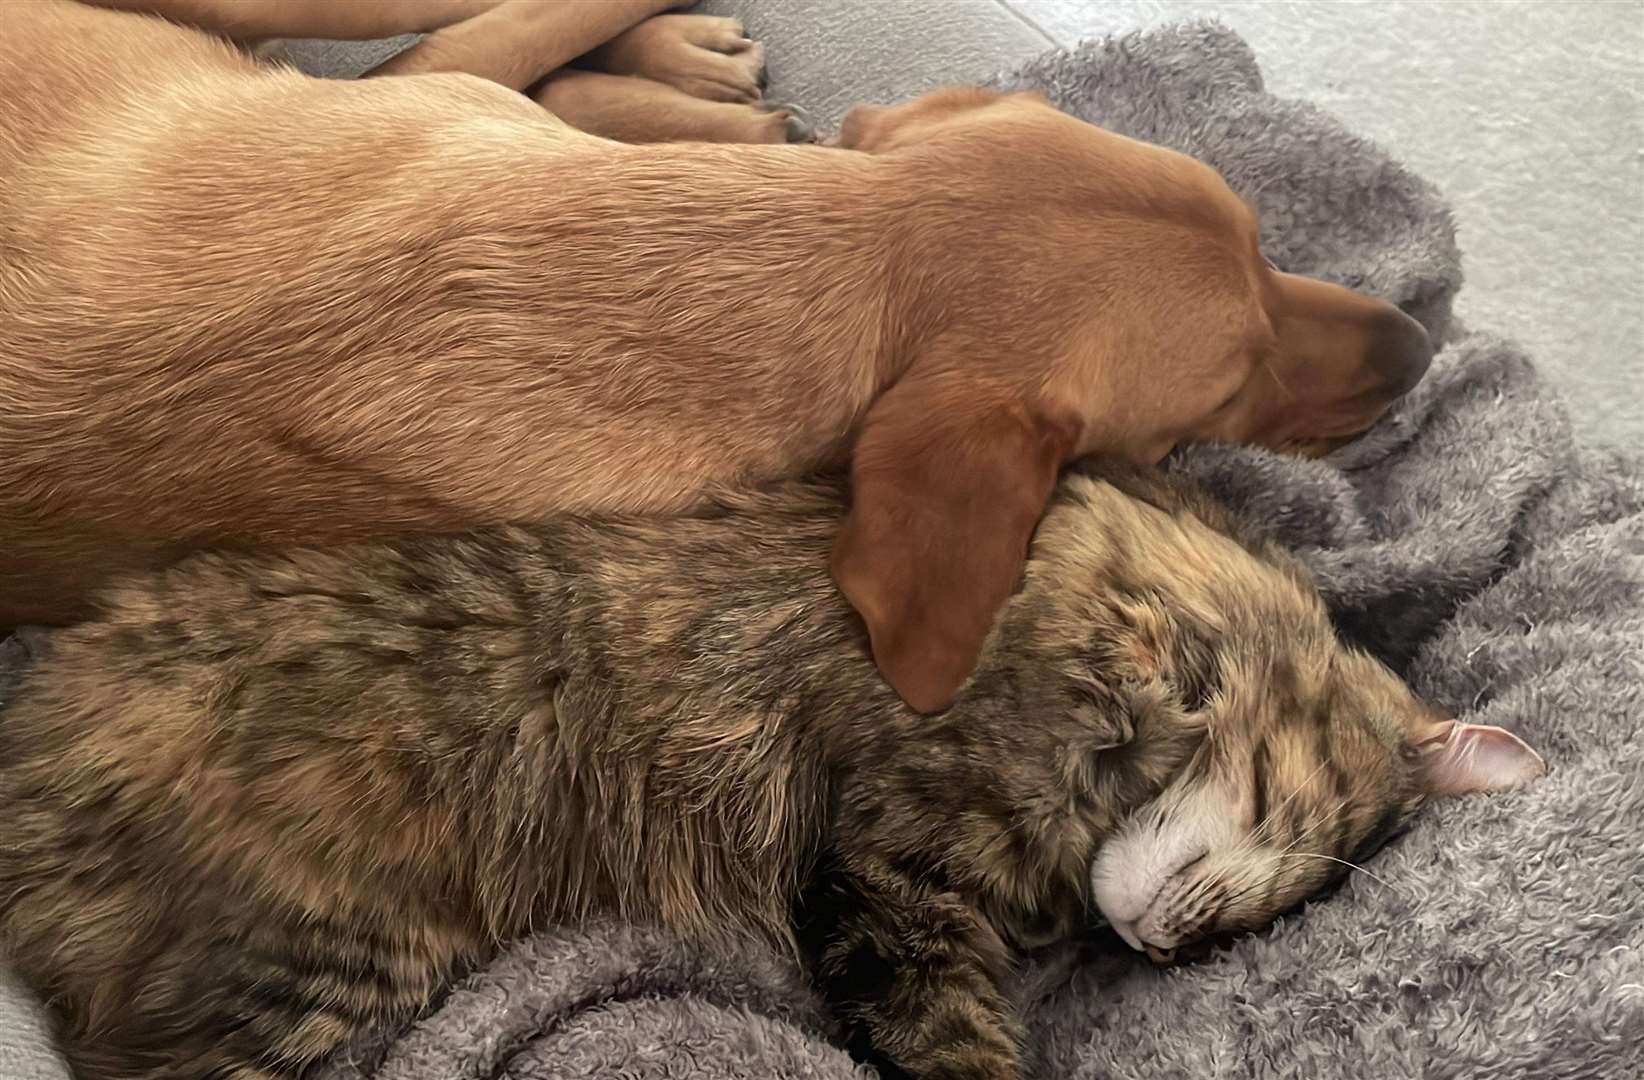 Honey snuggling with the couple’s dog Rocky